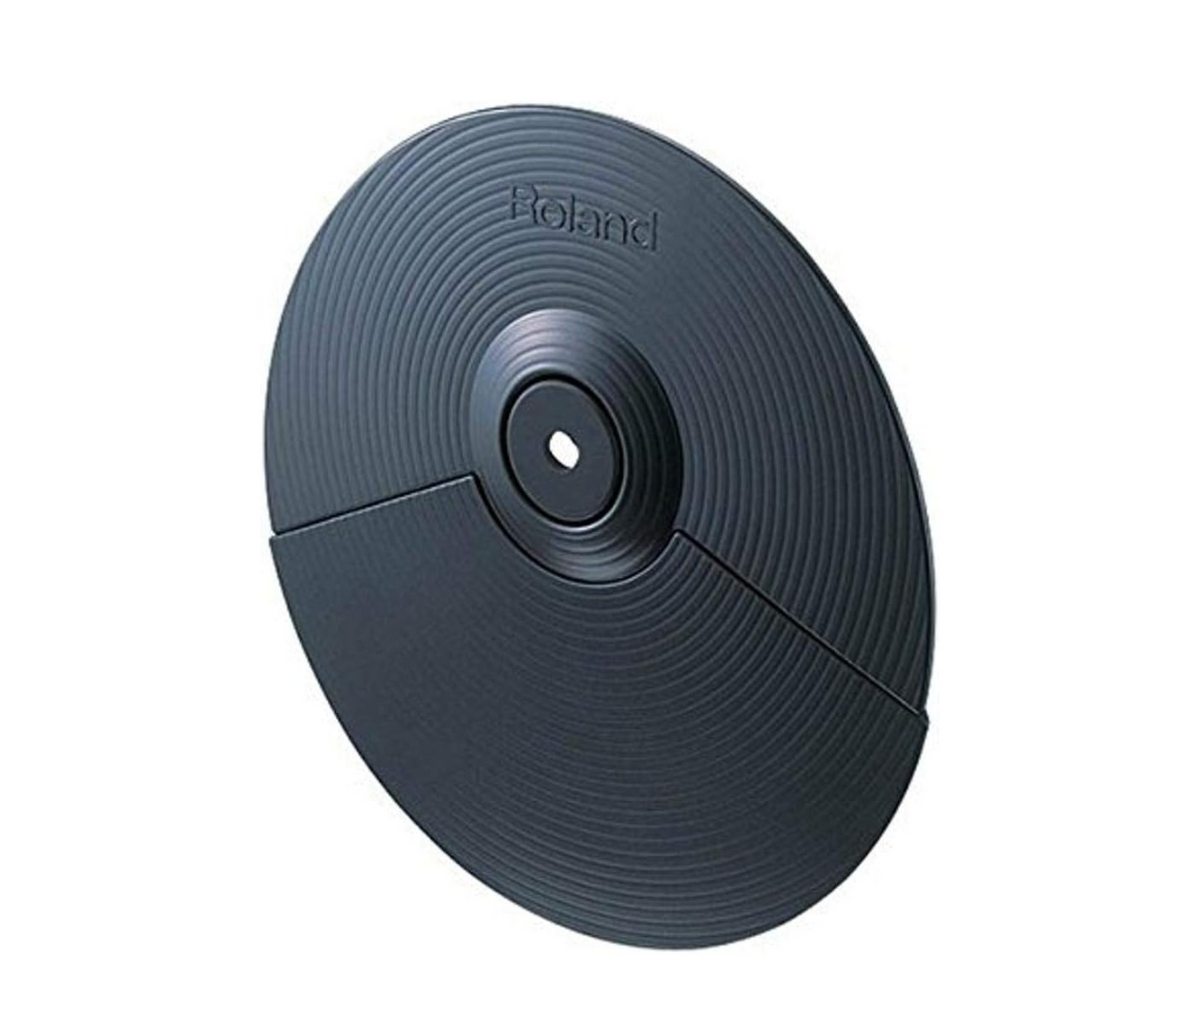 Roland CY-8 Dual-Trigger Cymbal Pad Electric Drum Cymbals with Swinging Motion, Separate Bow/Edge Triggering and Choke Capabilities